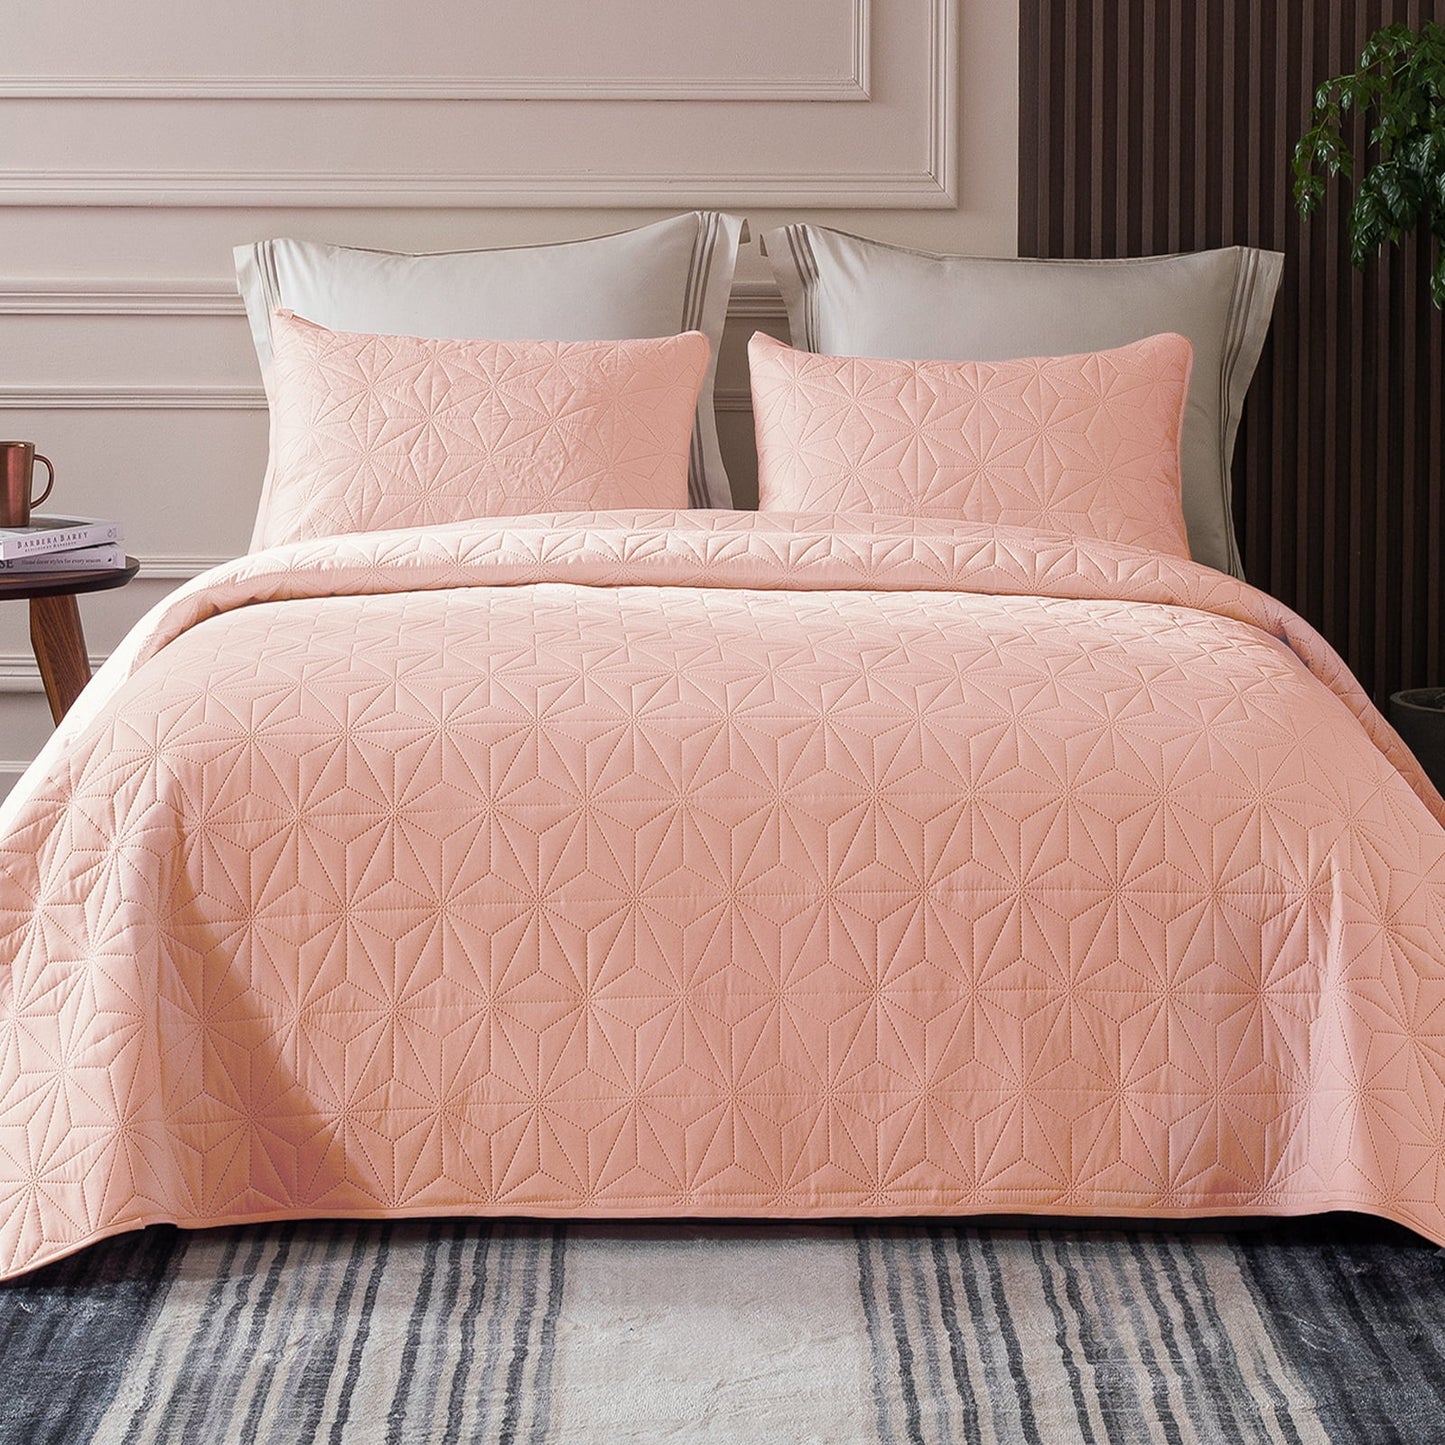 Whale Flotilla Microfiber California King (104x112 inches) Quilt Set Lightweight Quilted Bedspreads Coverlets Set with Stars Pattern, Blush Pink, 3 Piece (1 Quilt, 2 Shams)